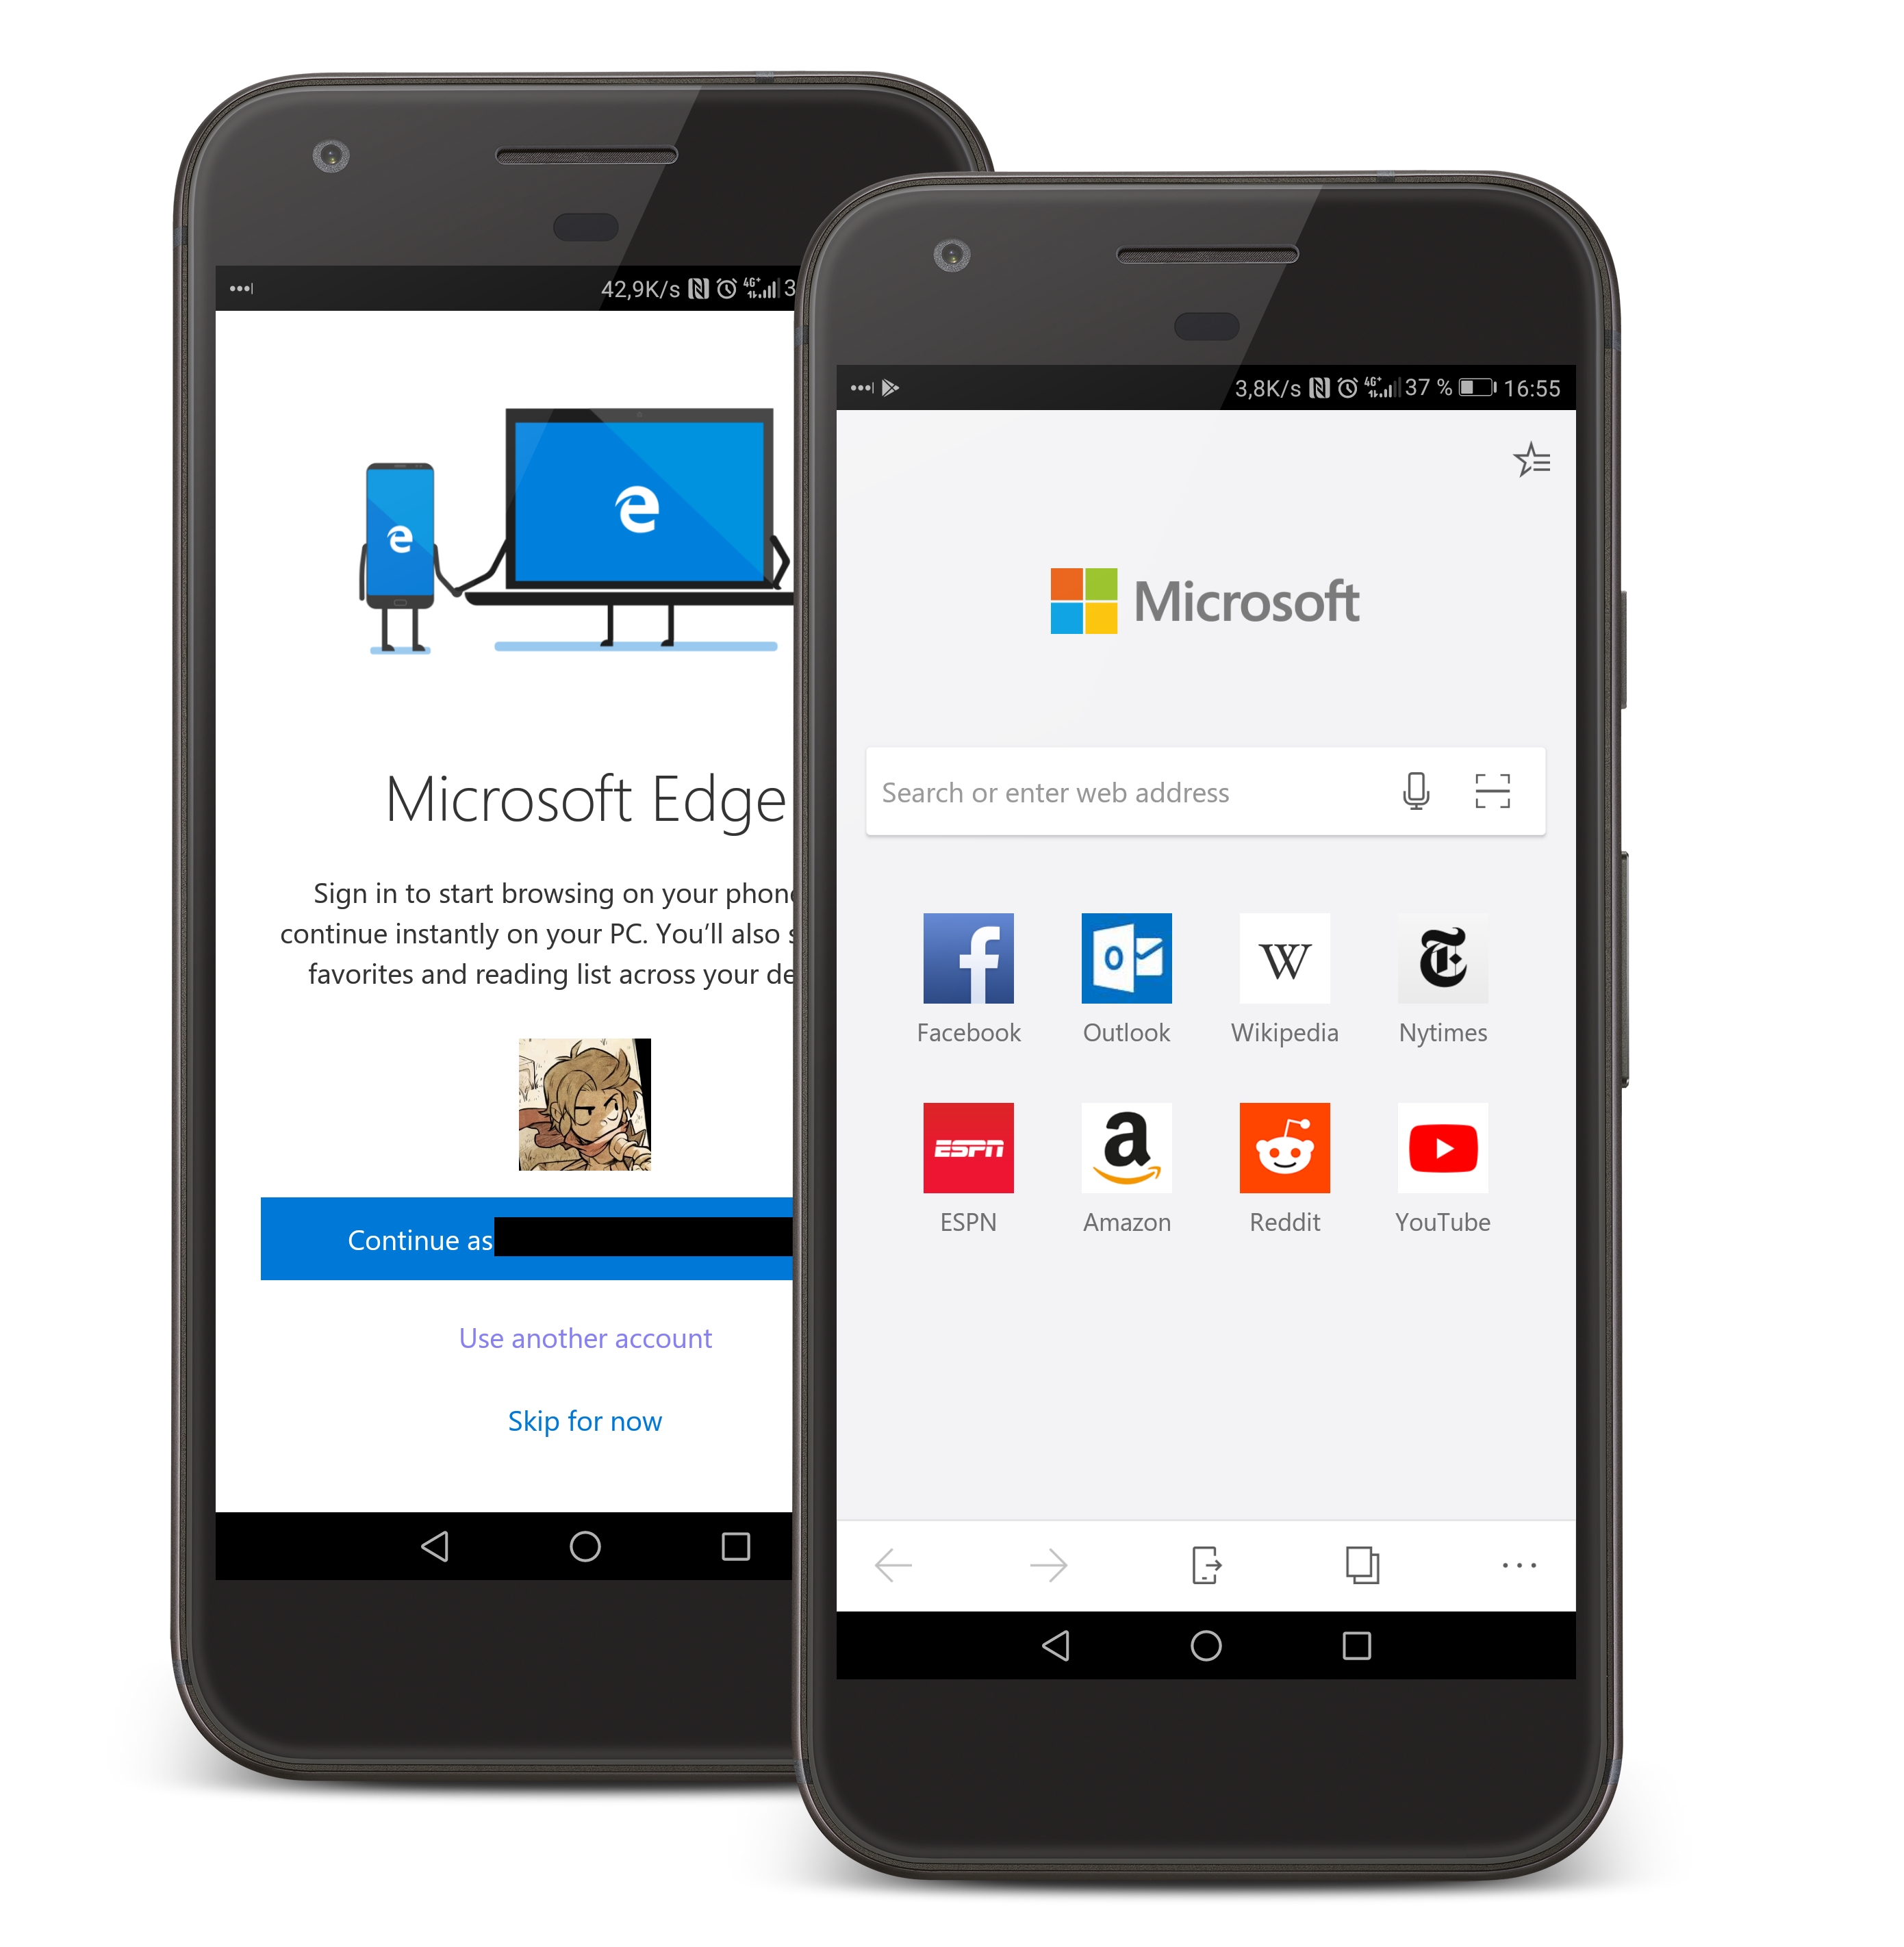 microsoft edge browser for android apk download